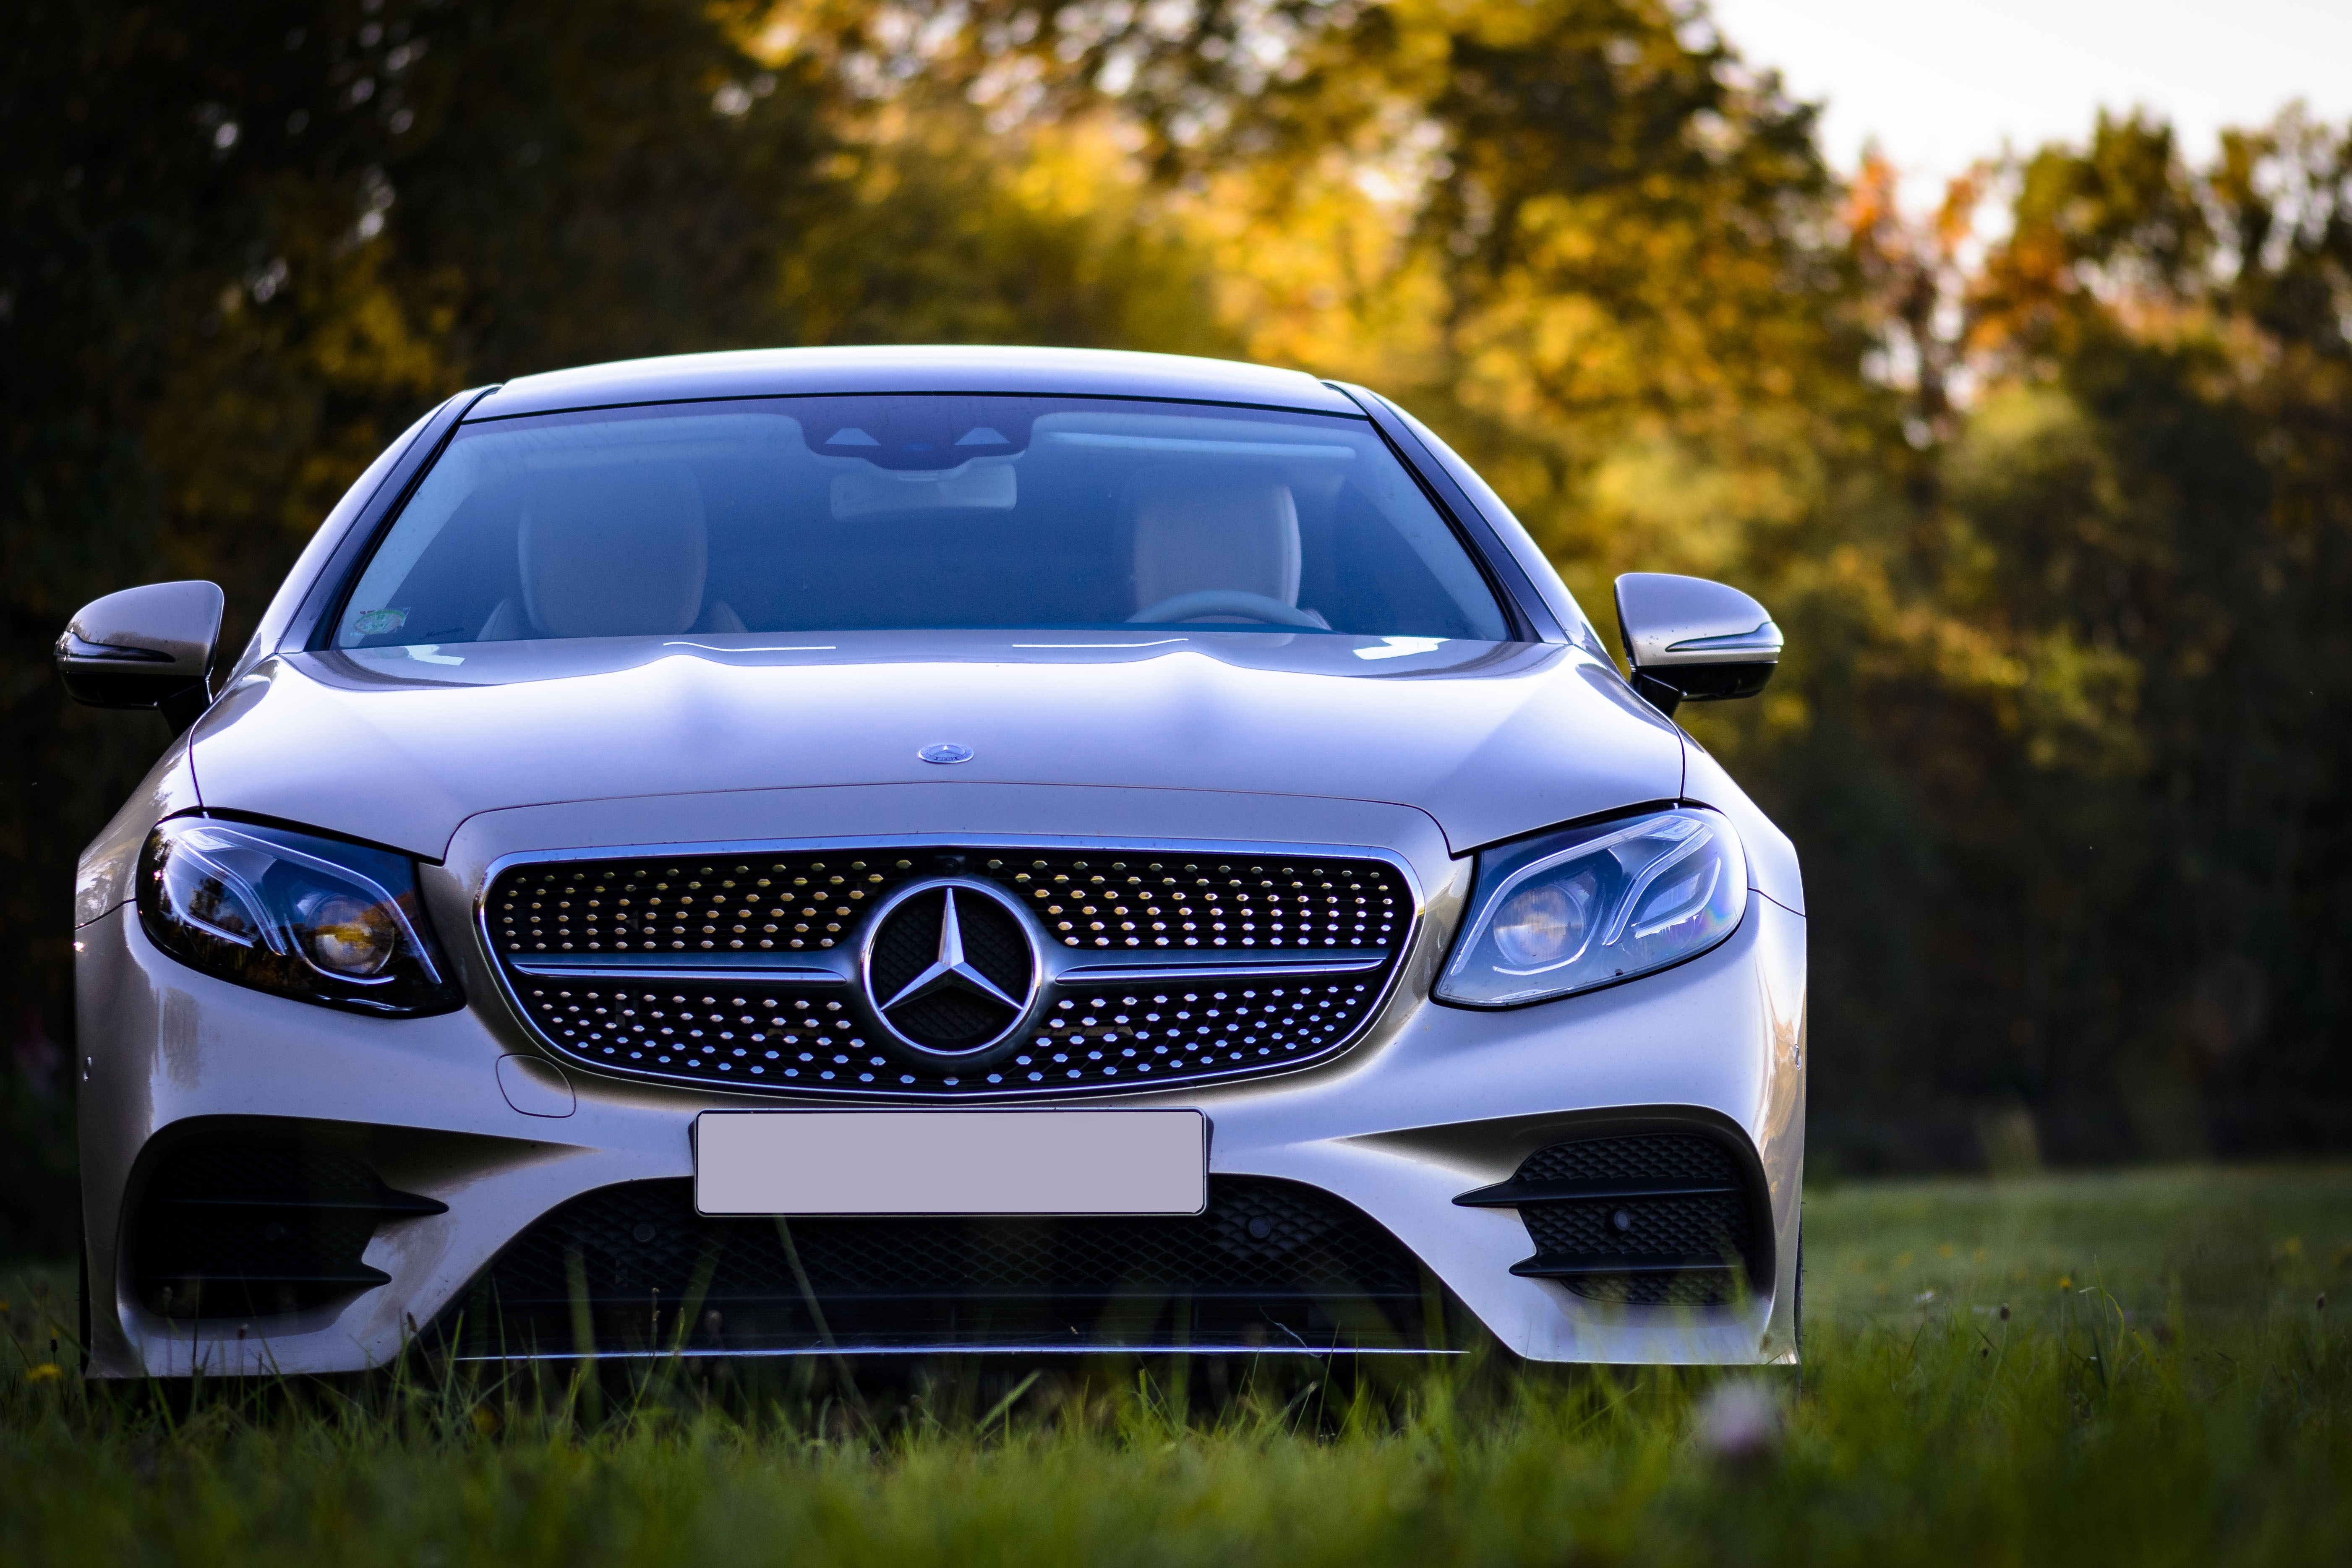 Cool Wallpapers car, cars, front view, mercedes benz, mercedes, modern, up to date, silver, silvery